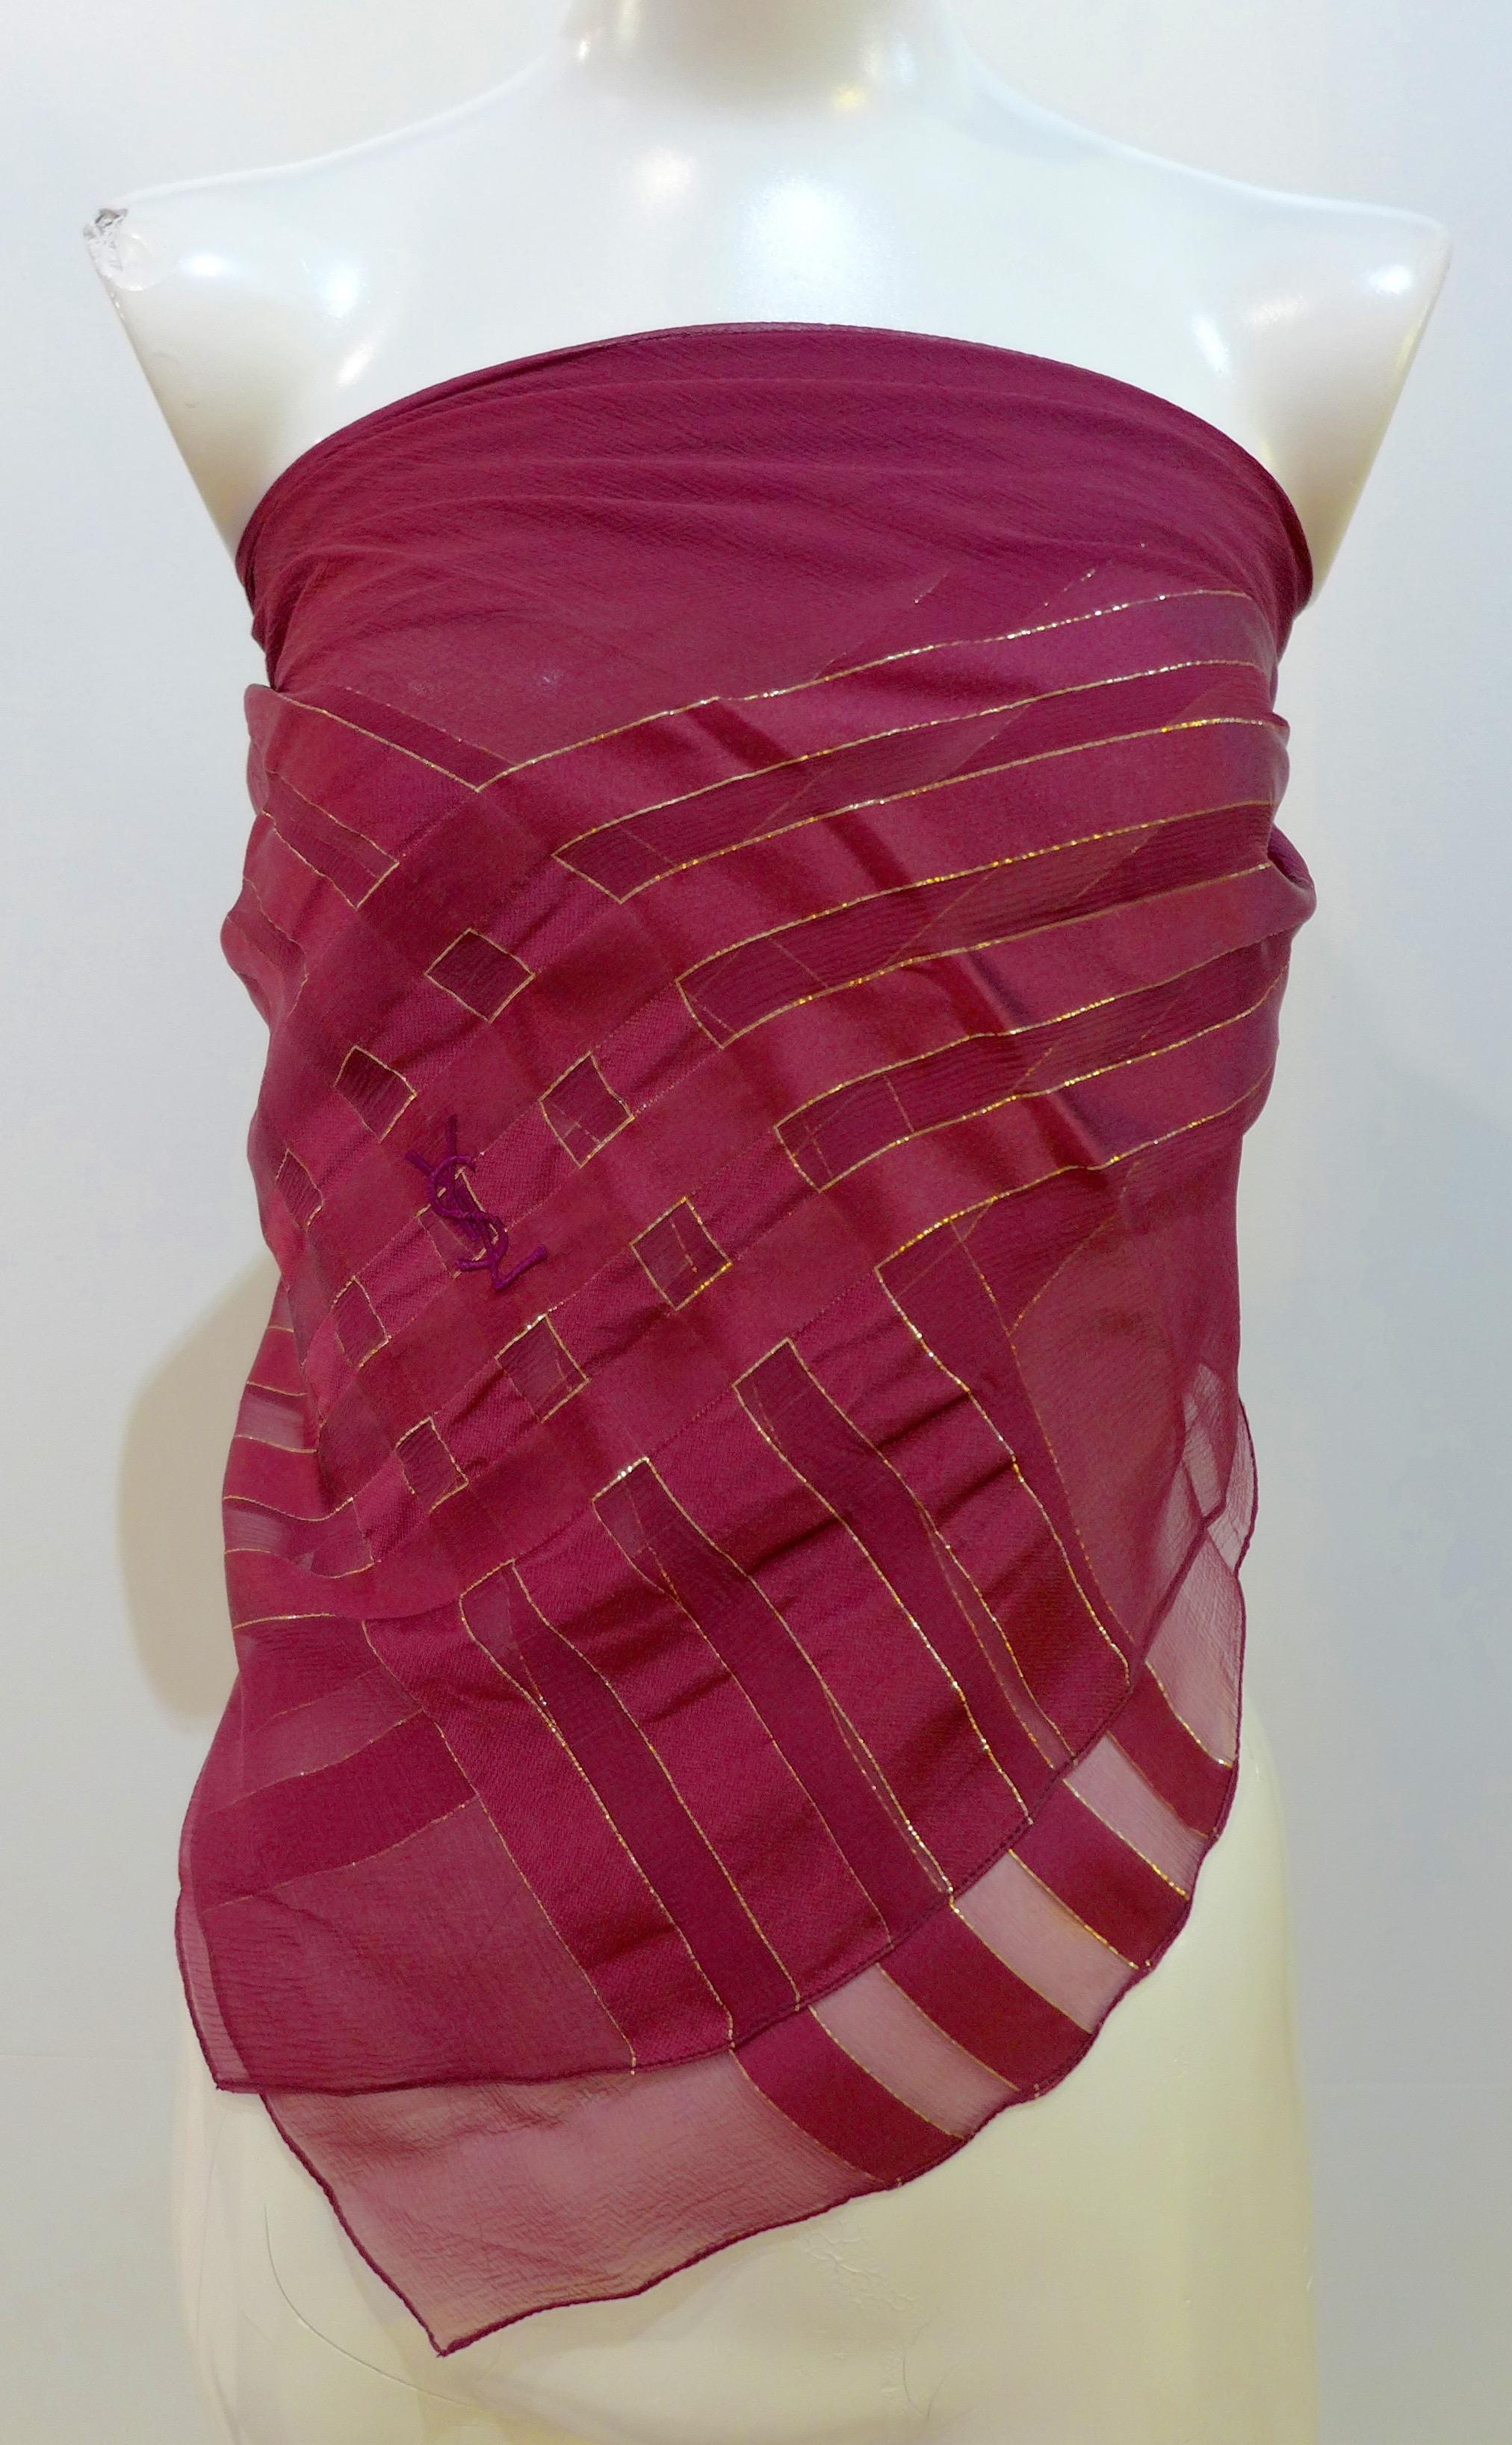 Yves Saint Laurent Purple Metallic Stripe Scarf In Good Condition For Sale In Los Angeles, CA